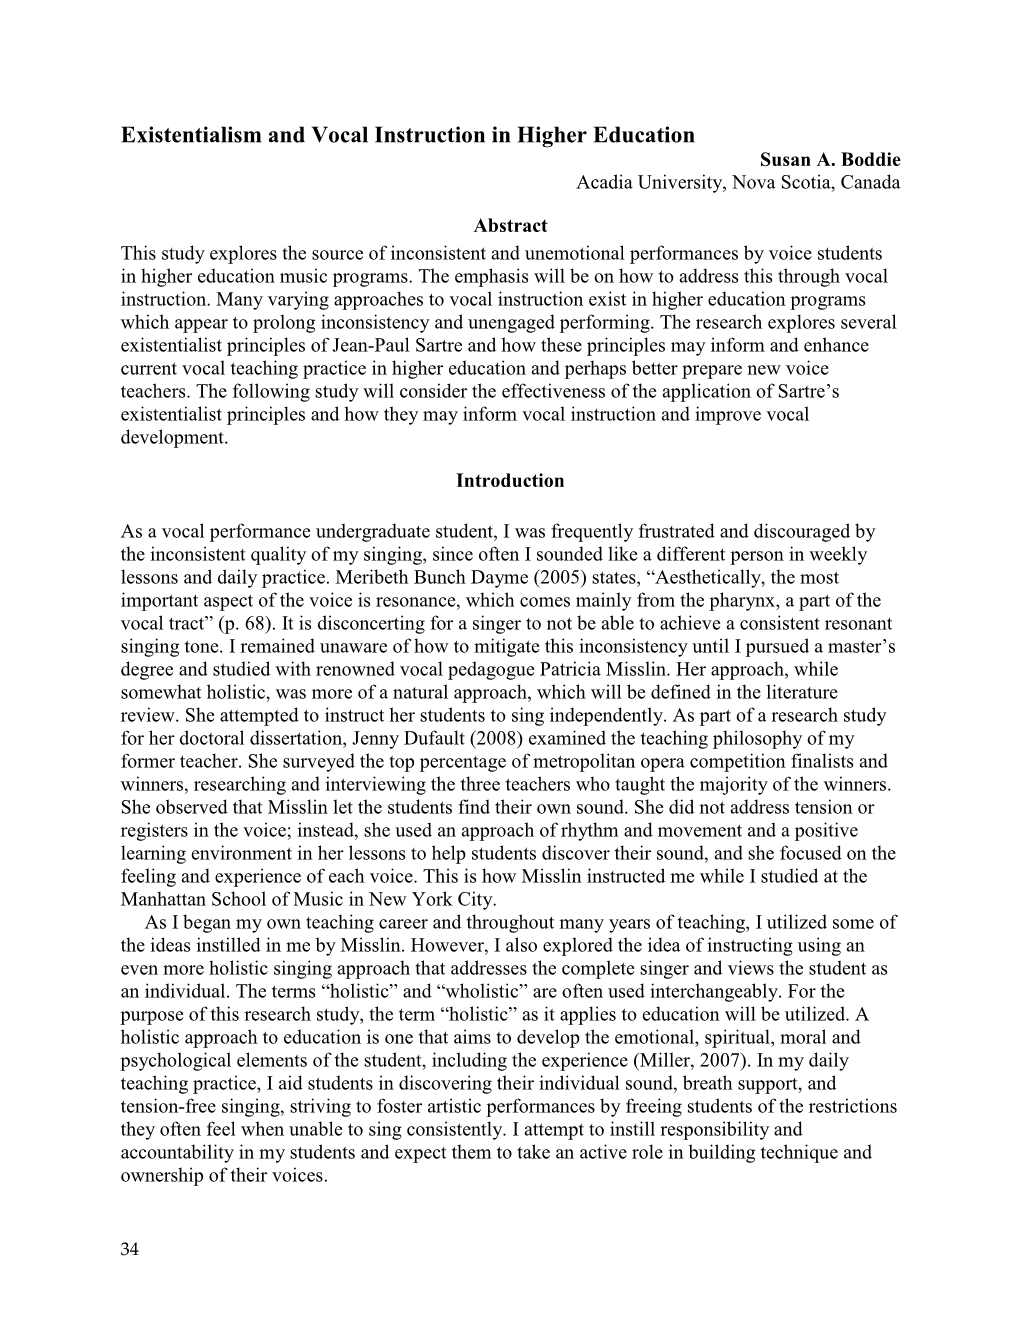 Existentialism and Vocal Instruction in Higher Education Susan A